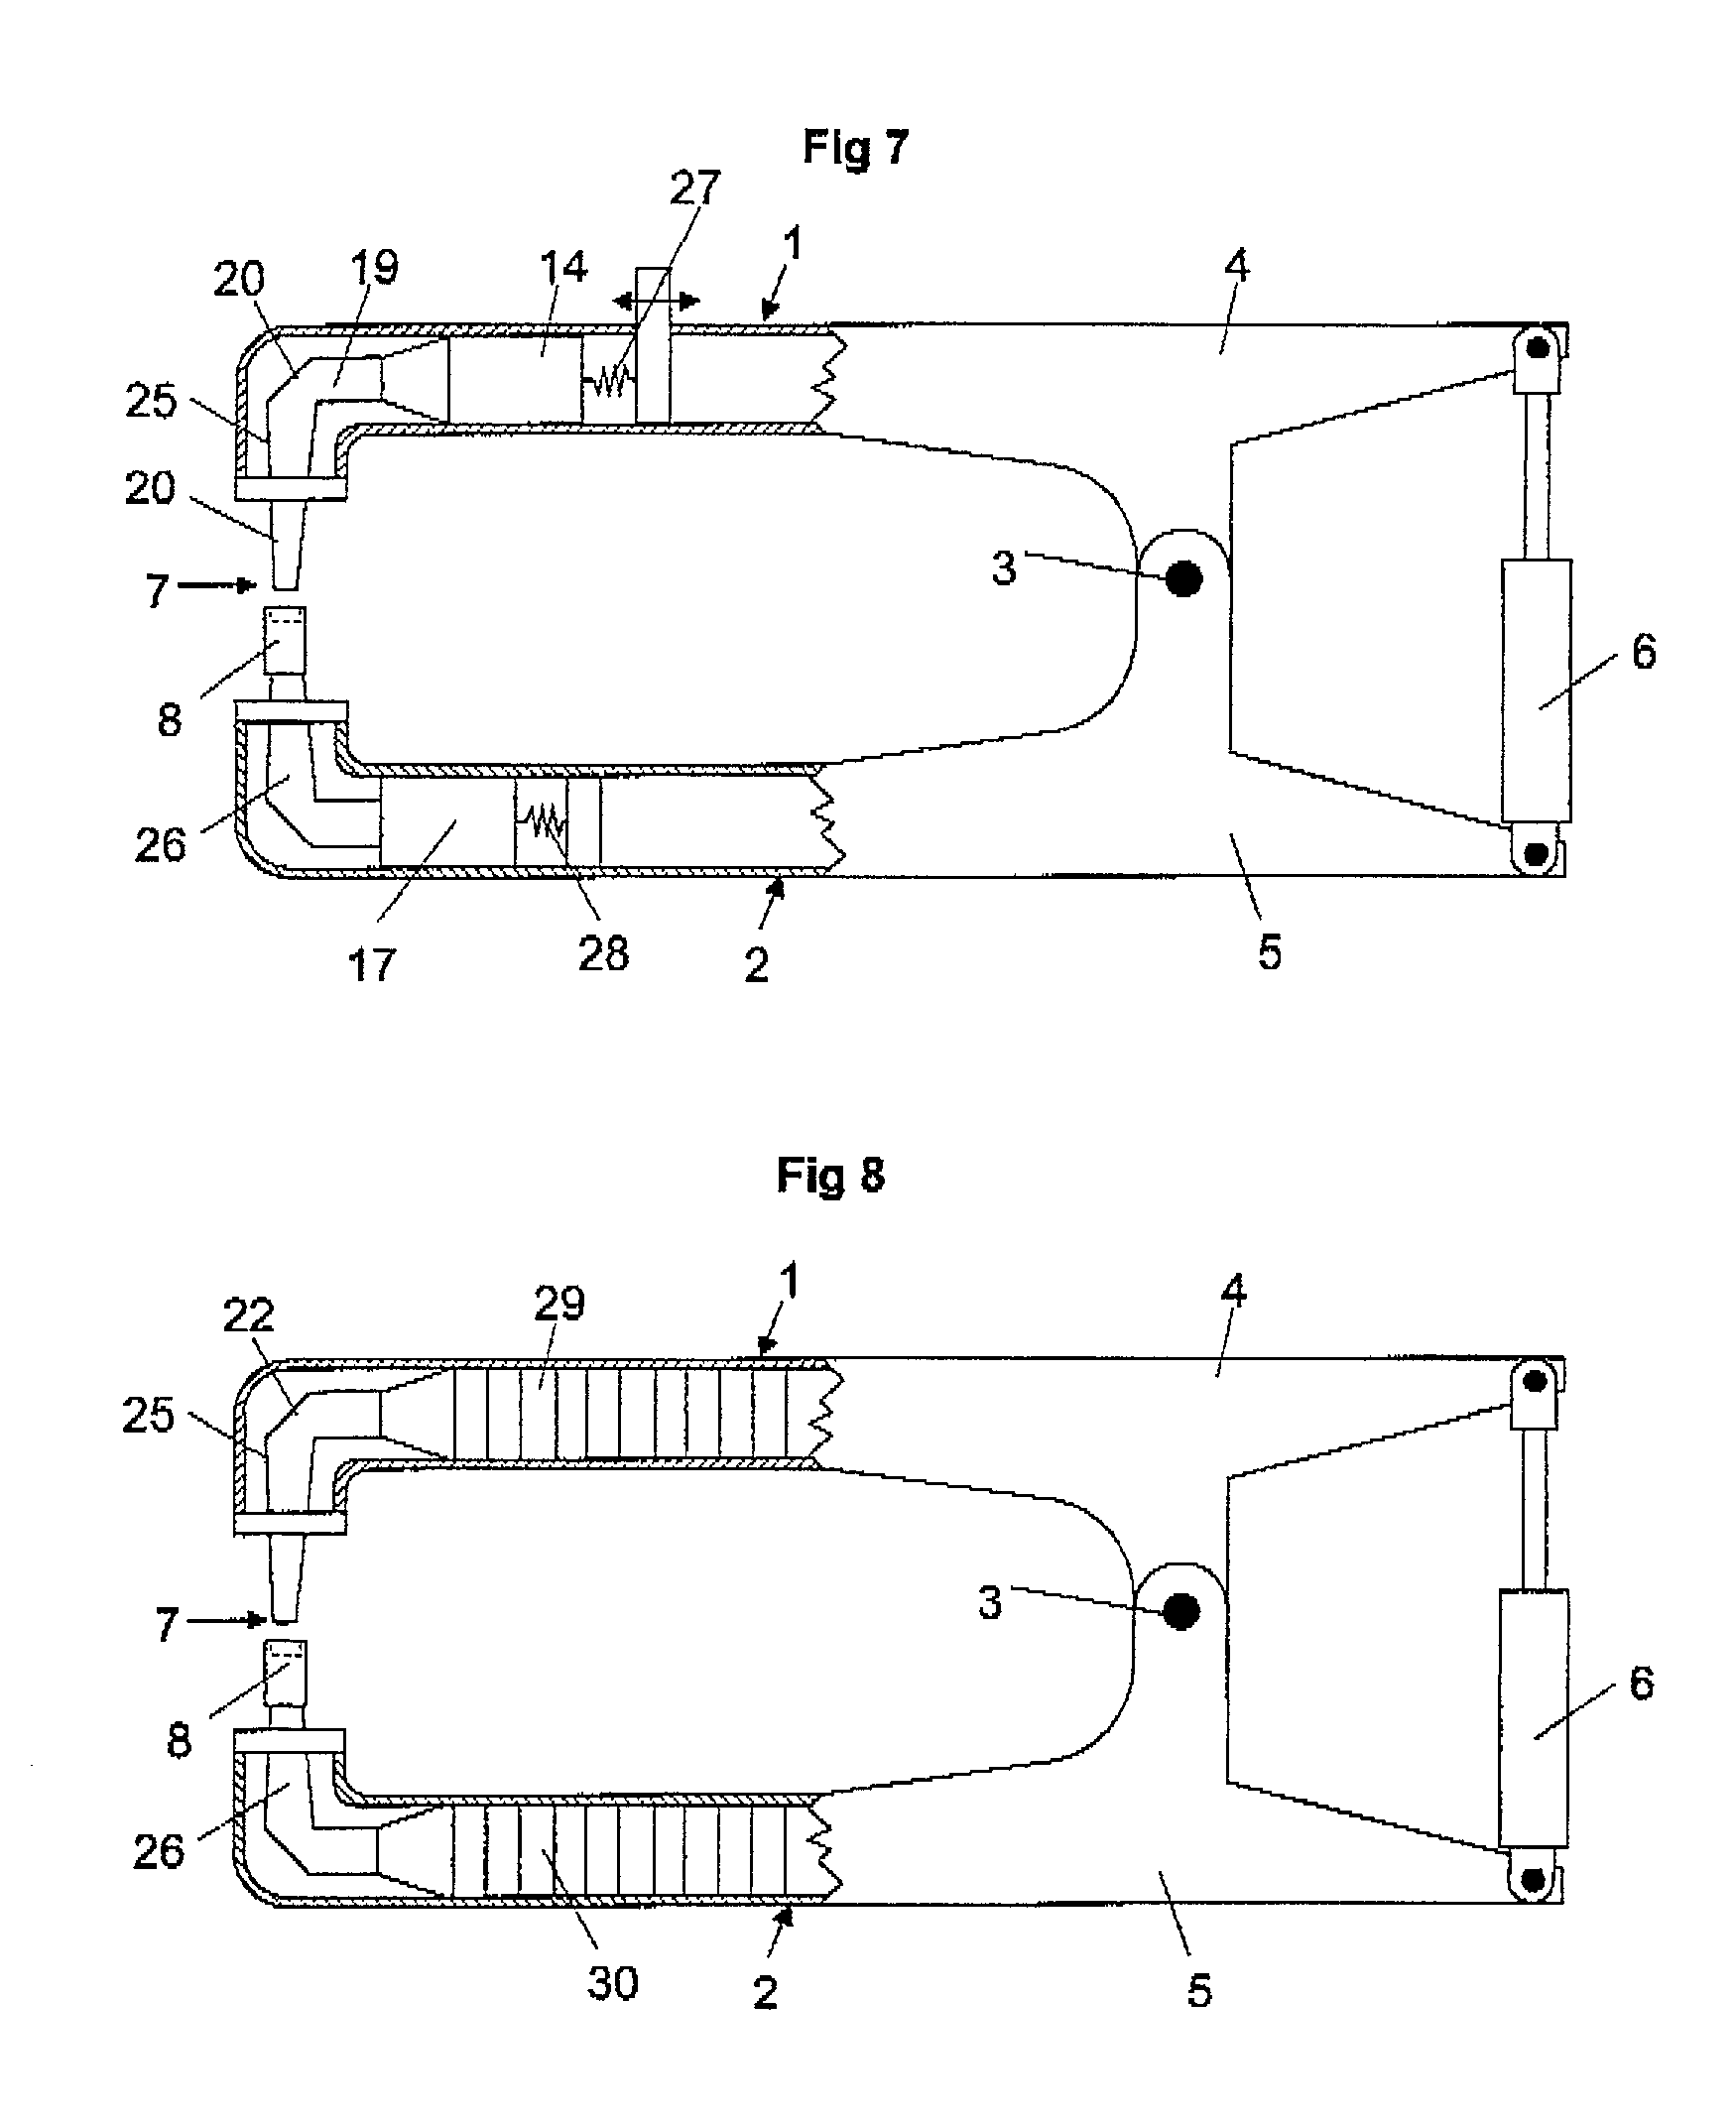 Process and apparatus for mechanically joining metallic components